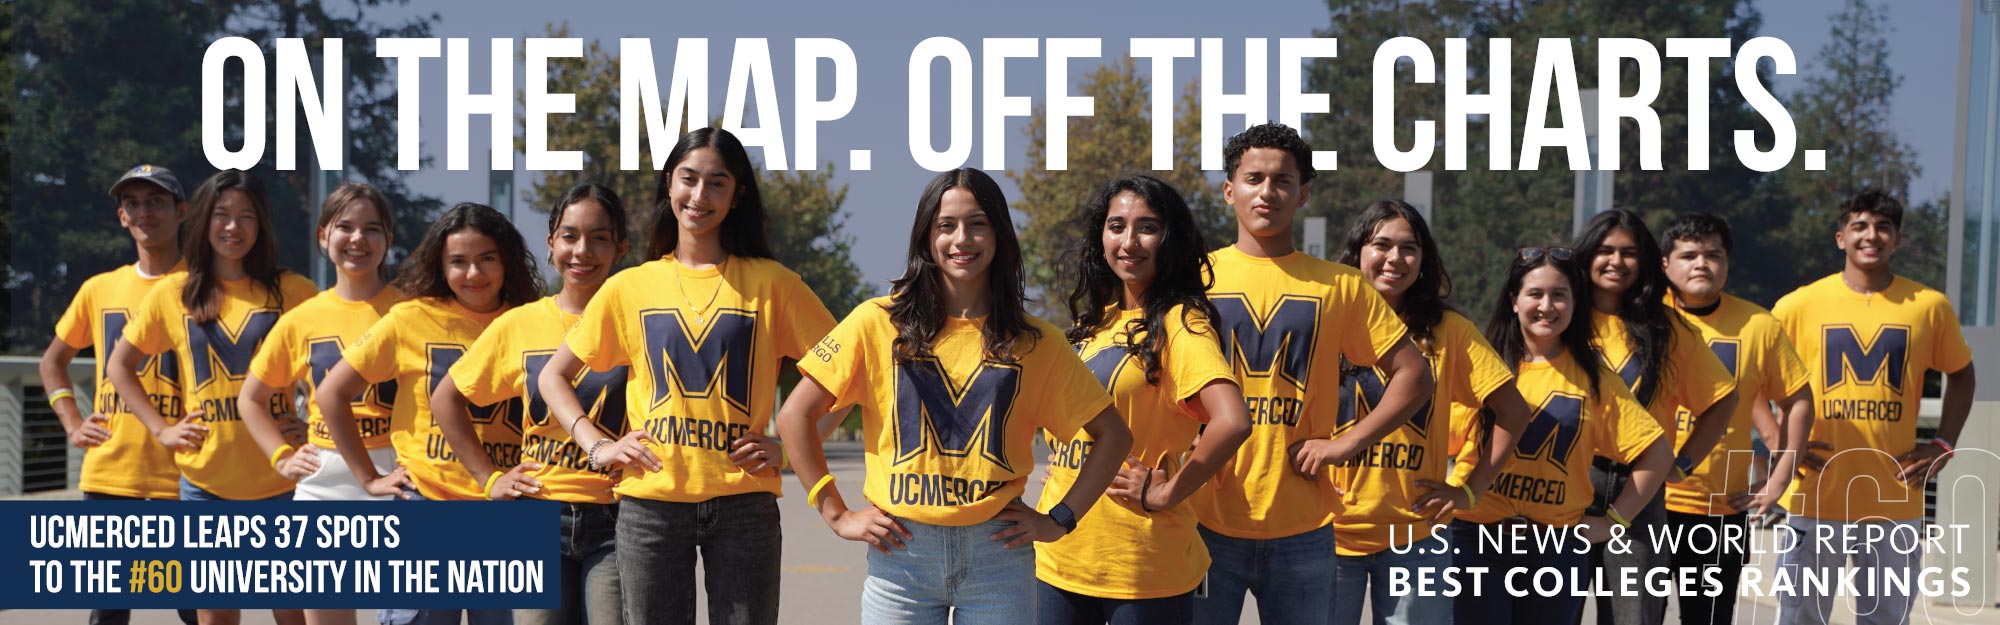 uc merced ranks 28 in the nation